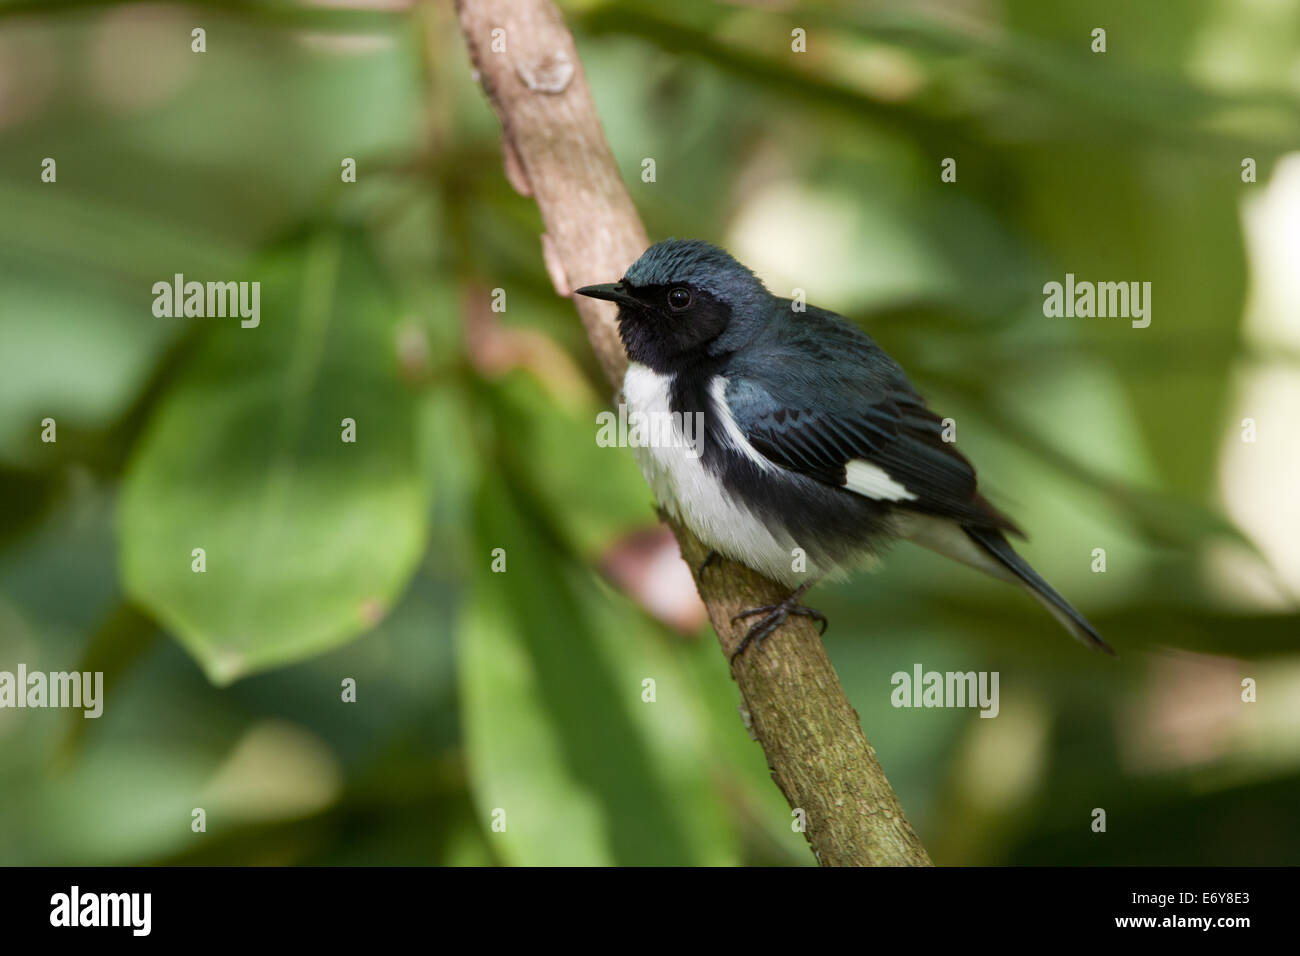 Black throated blue warbler in Rhododendron Tree perching bird songbird Ornithology Science Nature Wildlife Environment Stock Photo